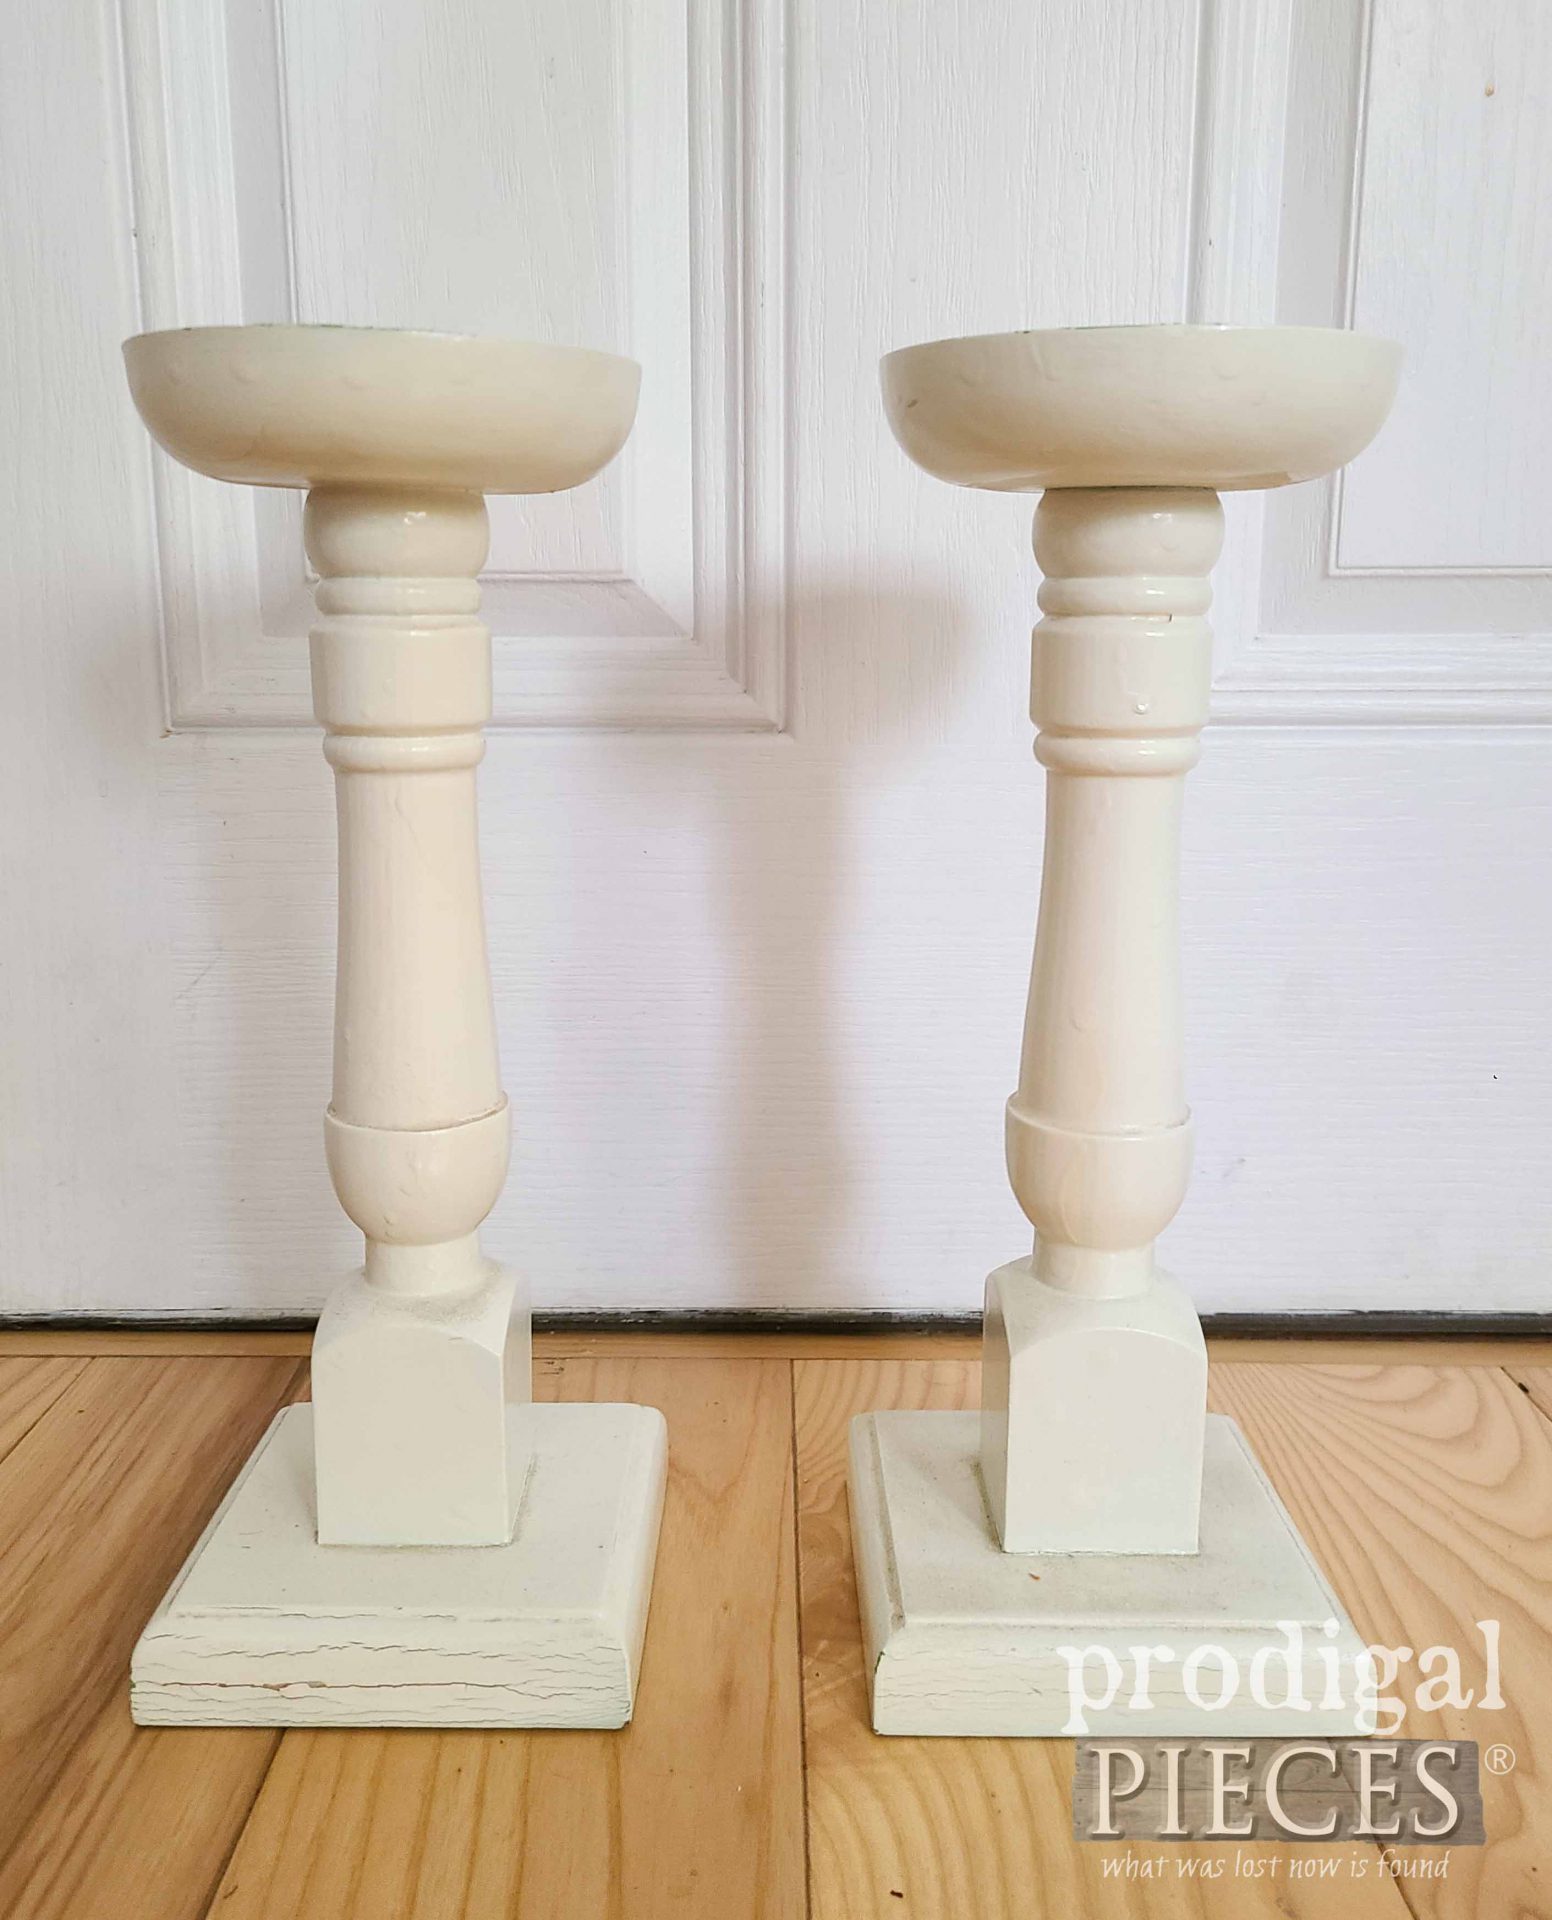 Thrifted Candlesticks Before Upcycle | prodigalpieces.com #prodigalpieces